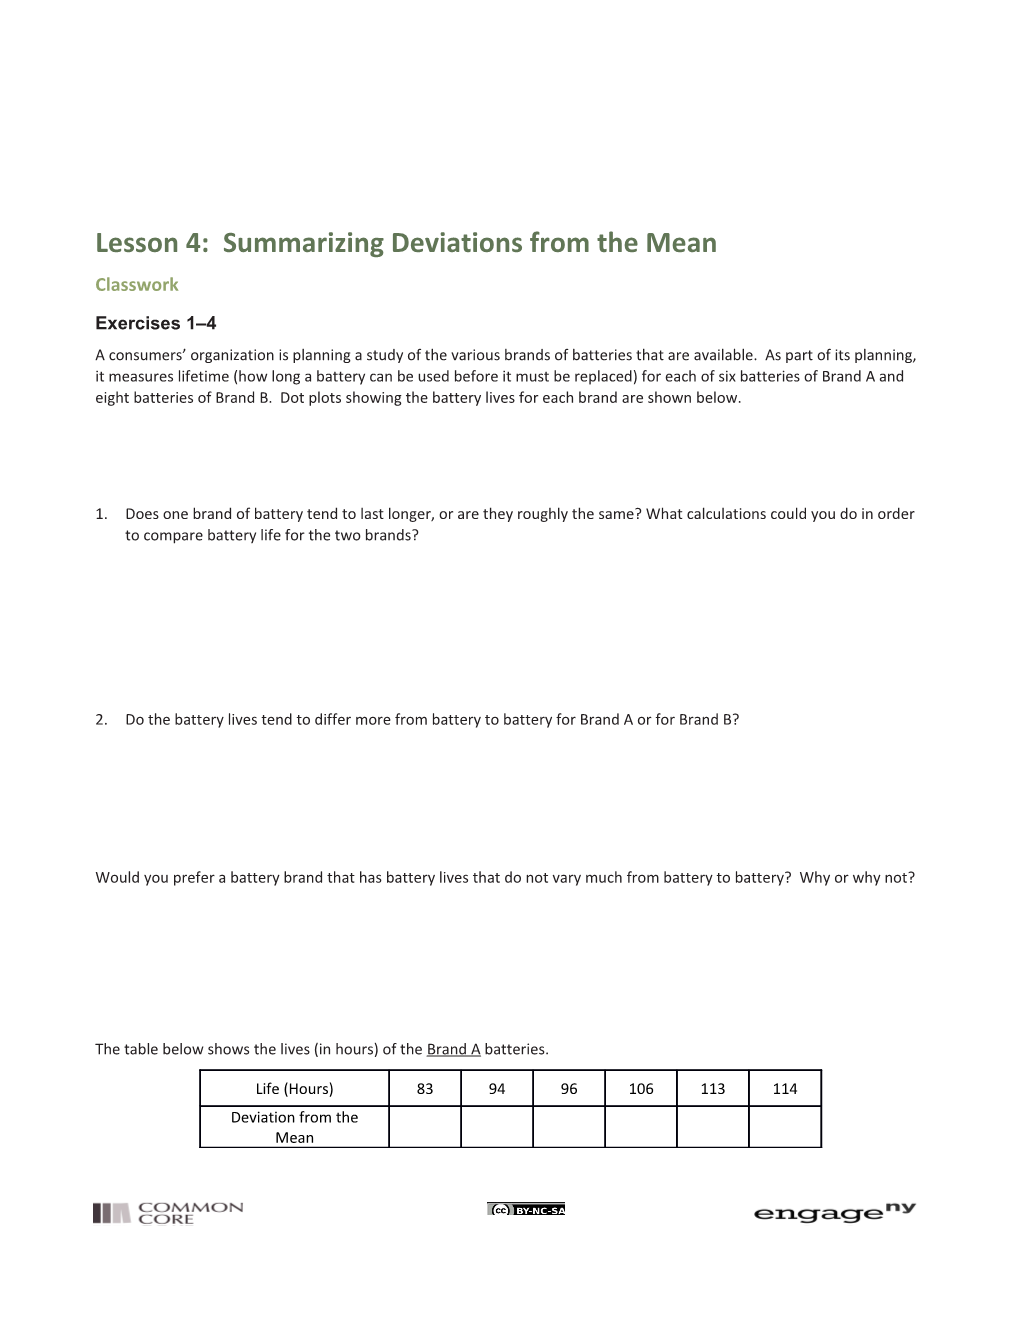 Lesson 4: Summarizing Deviations from the Mean